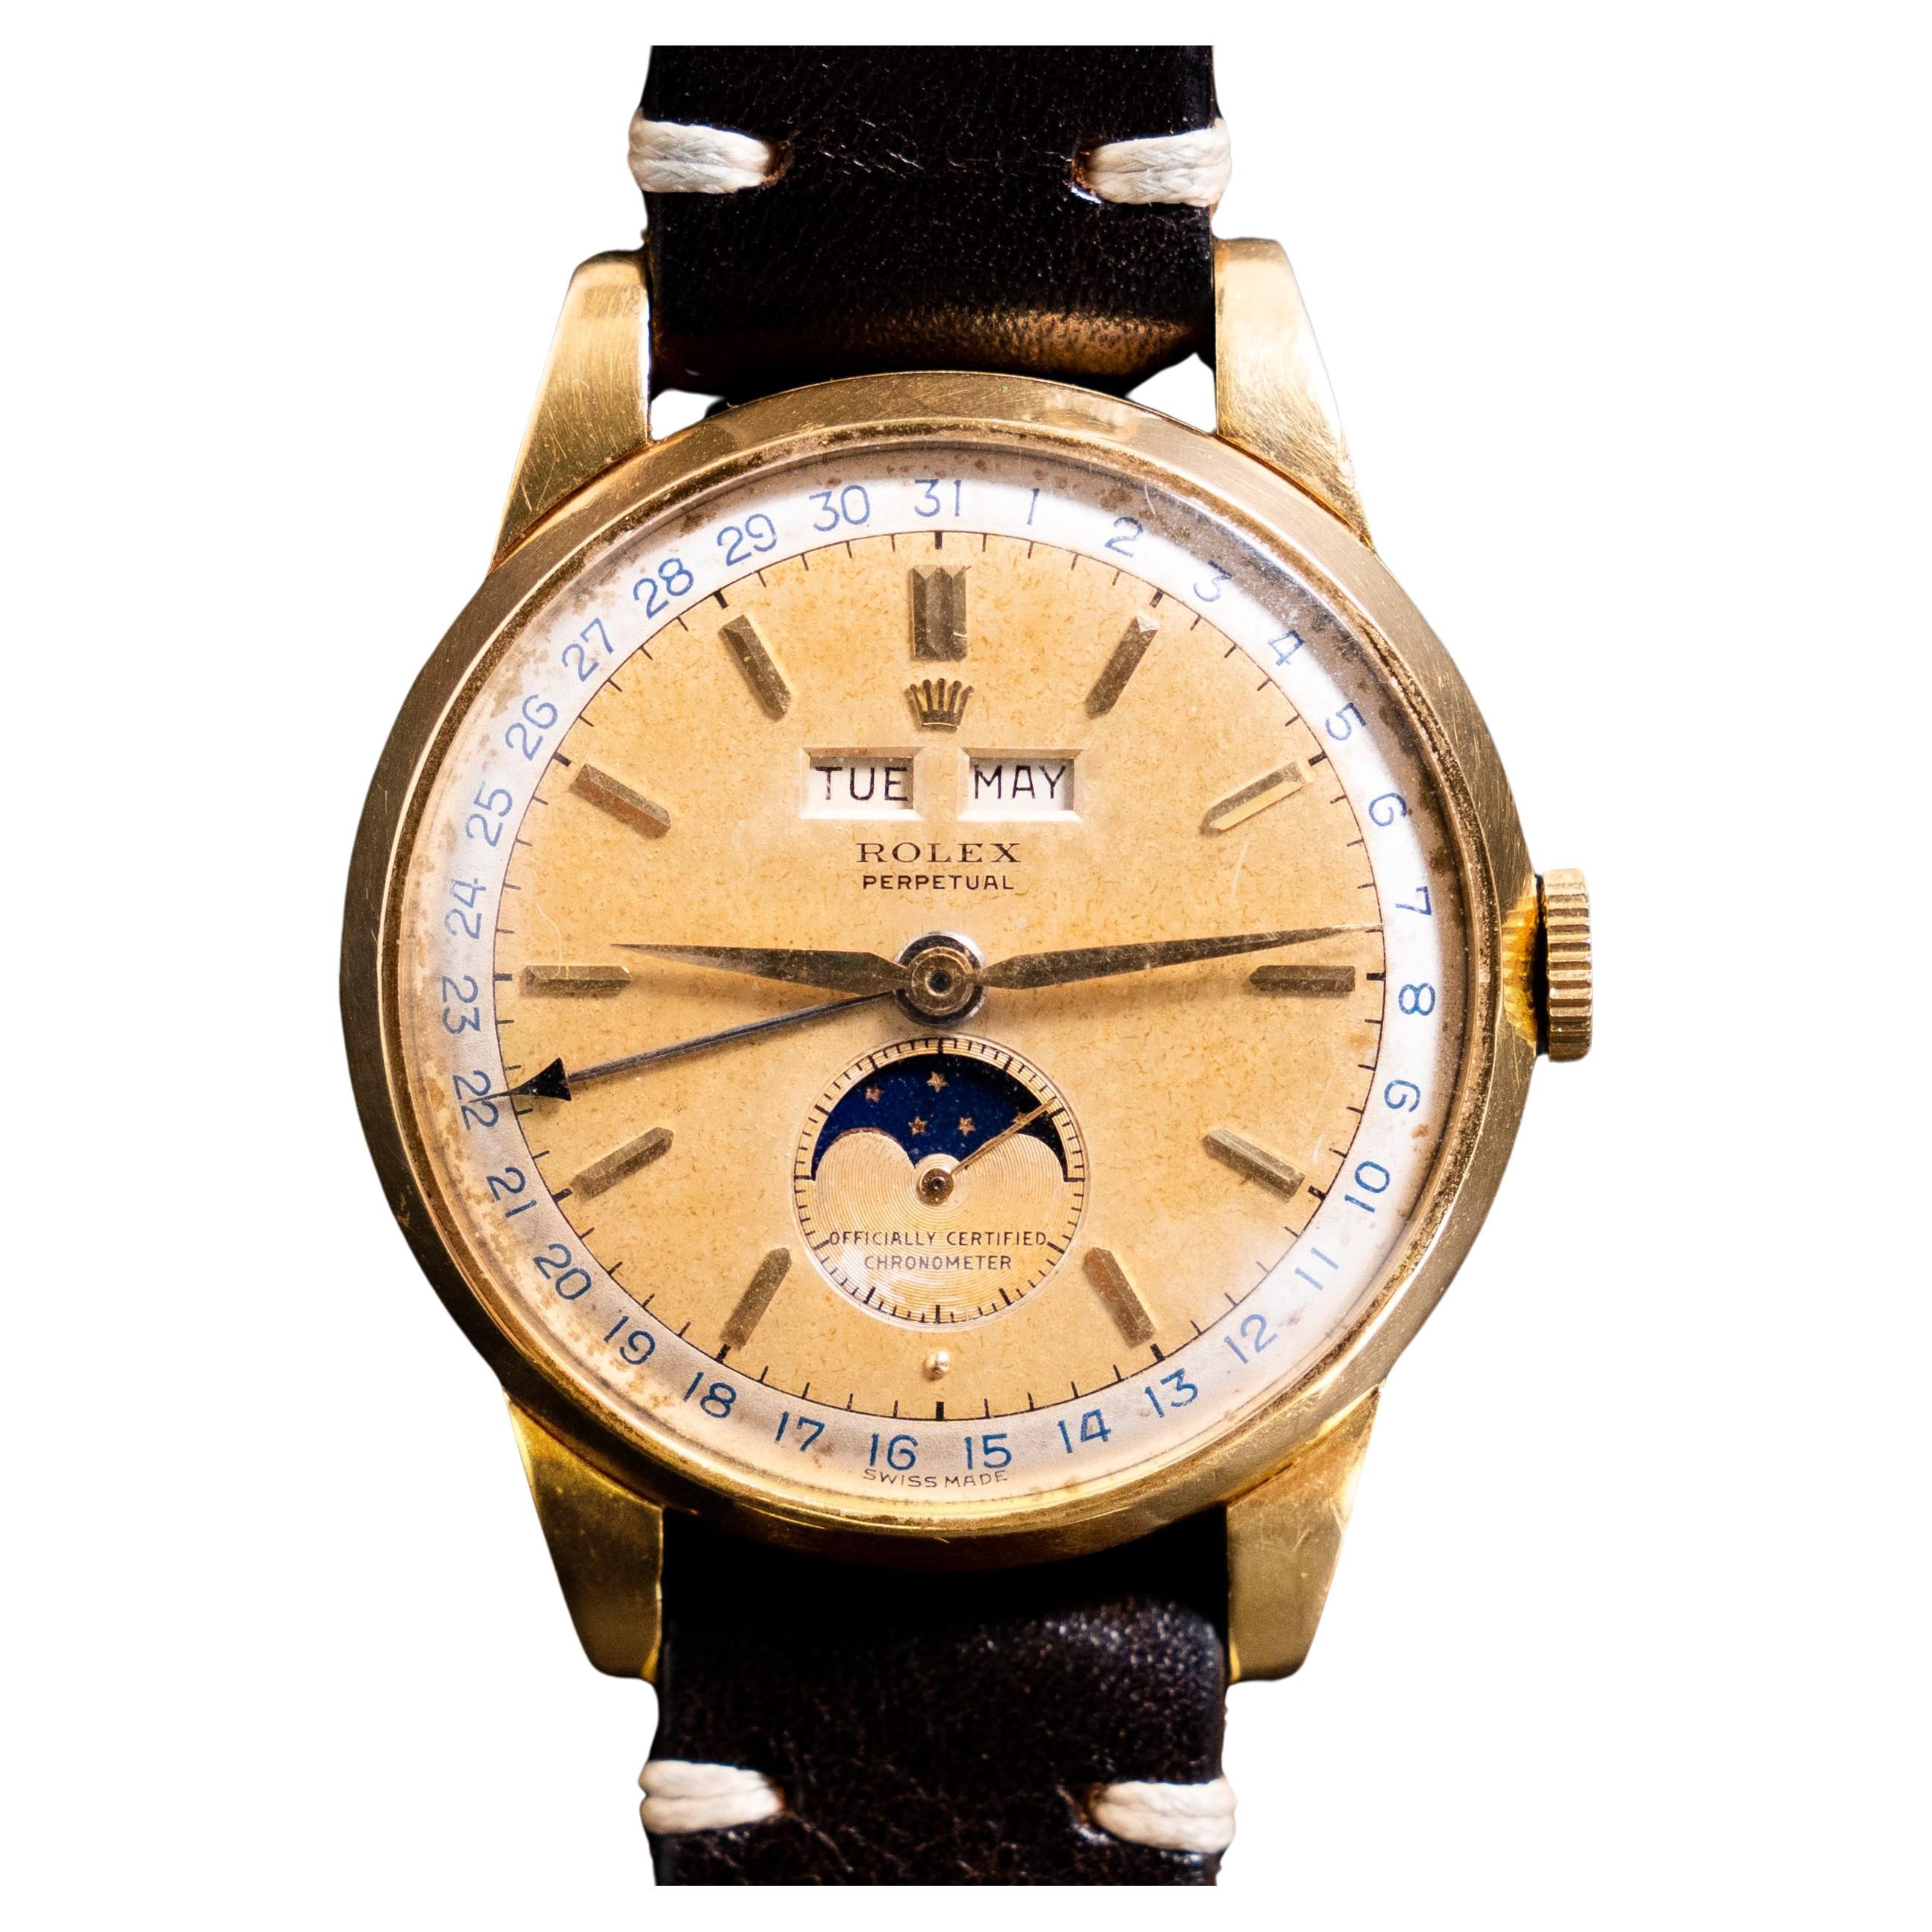 Rolex Yellow Gold Triple Date Calendar Moonphase Automatic Watch 8171, 1950